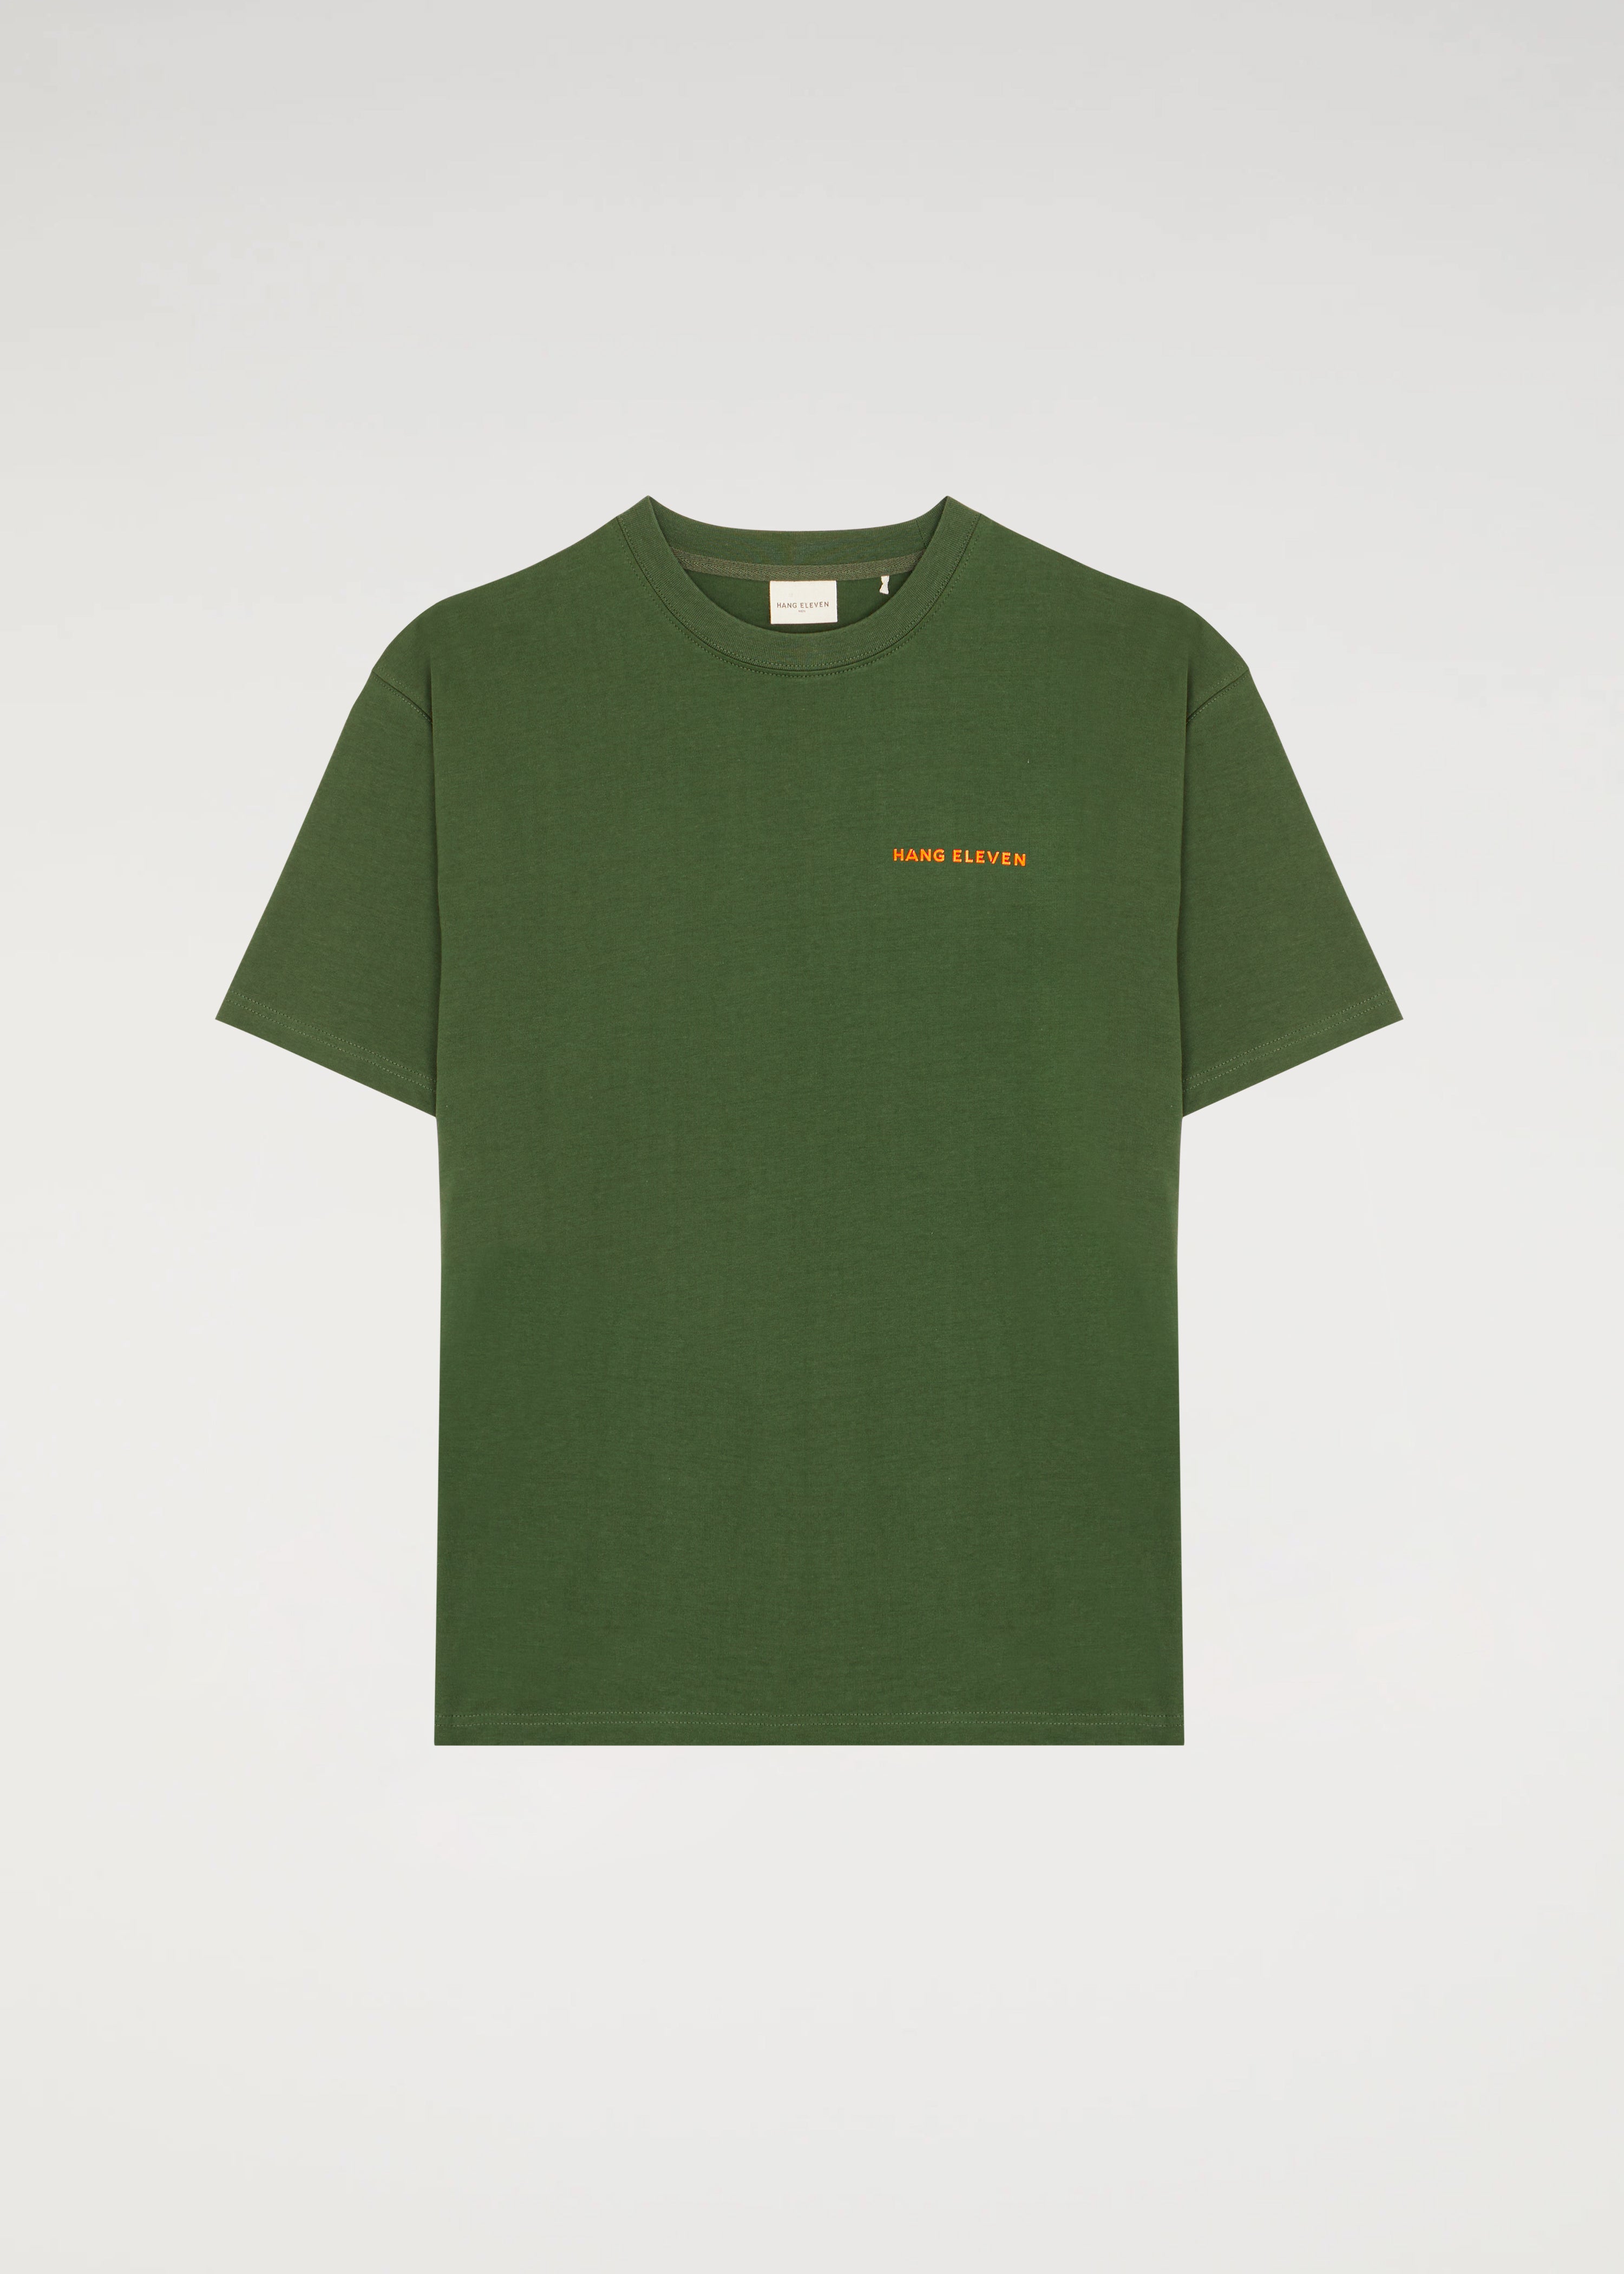 Explore Tee - Forest Green